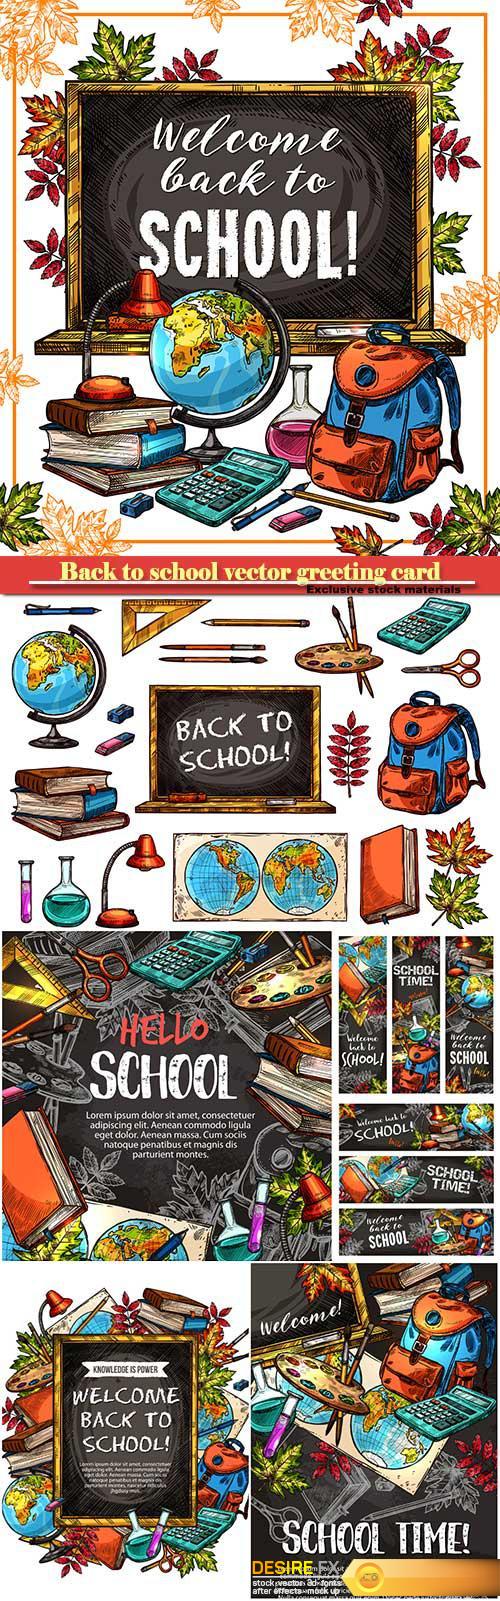 Back to school vector greeting card # 7